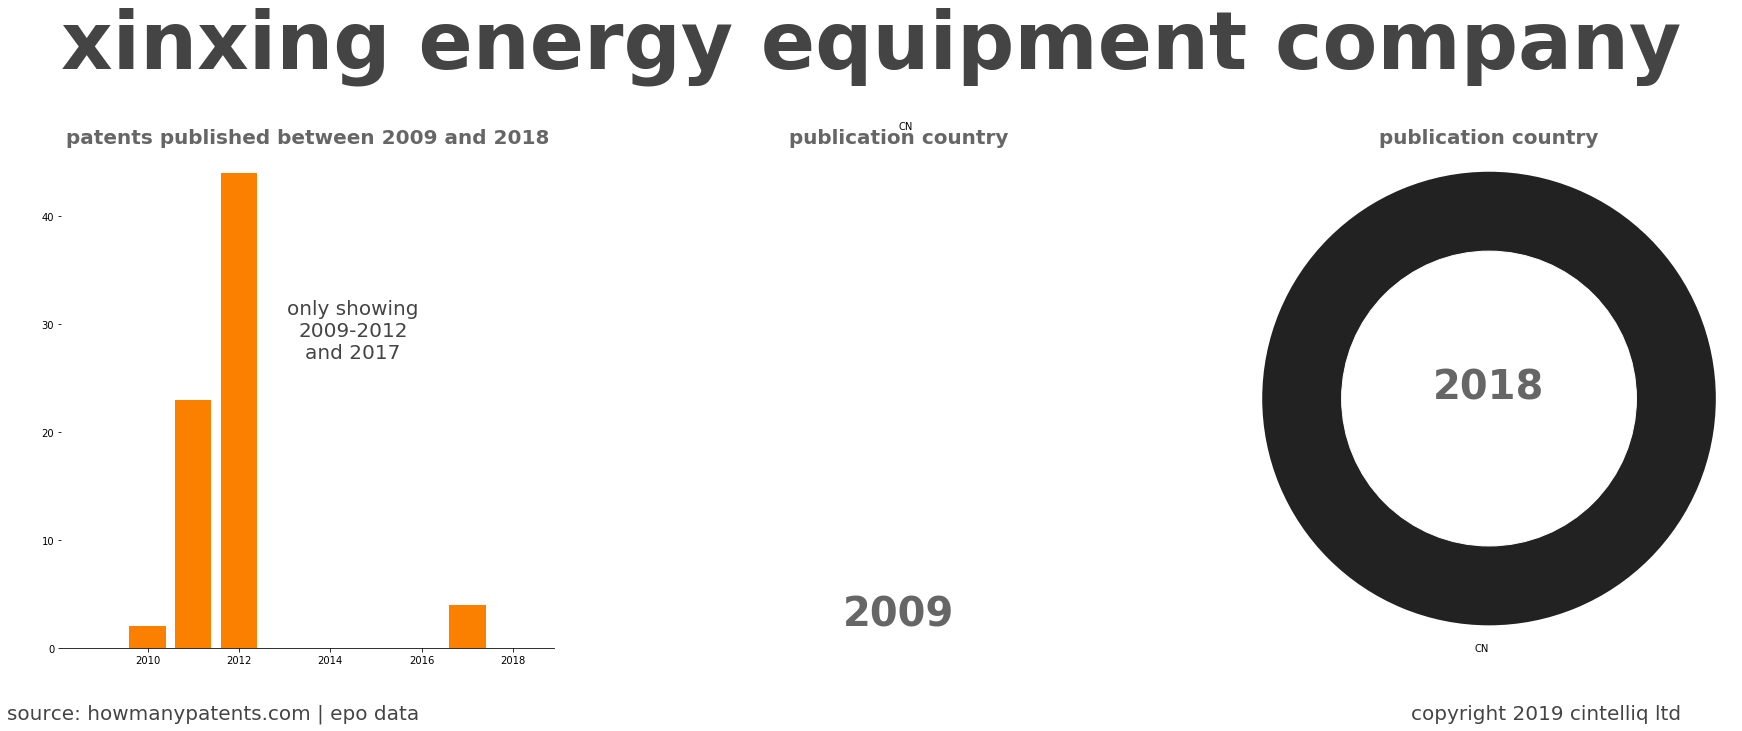 summary of patents for Xinxing Energy Equipment Company